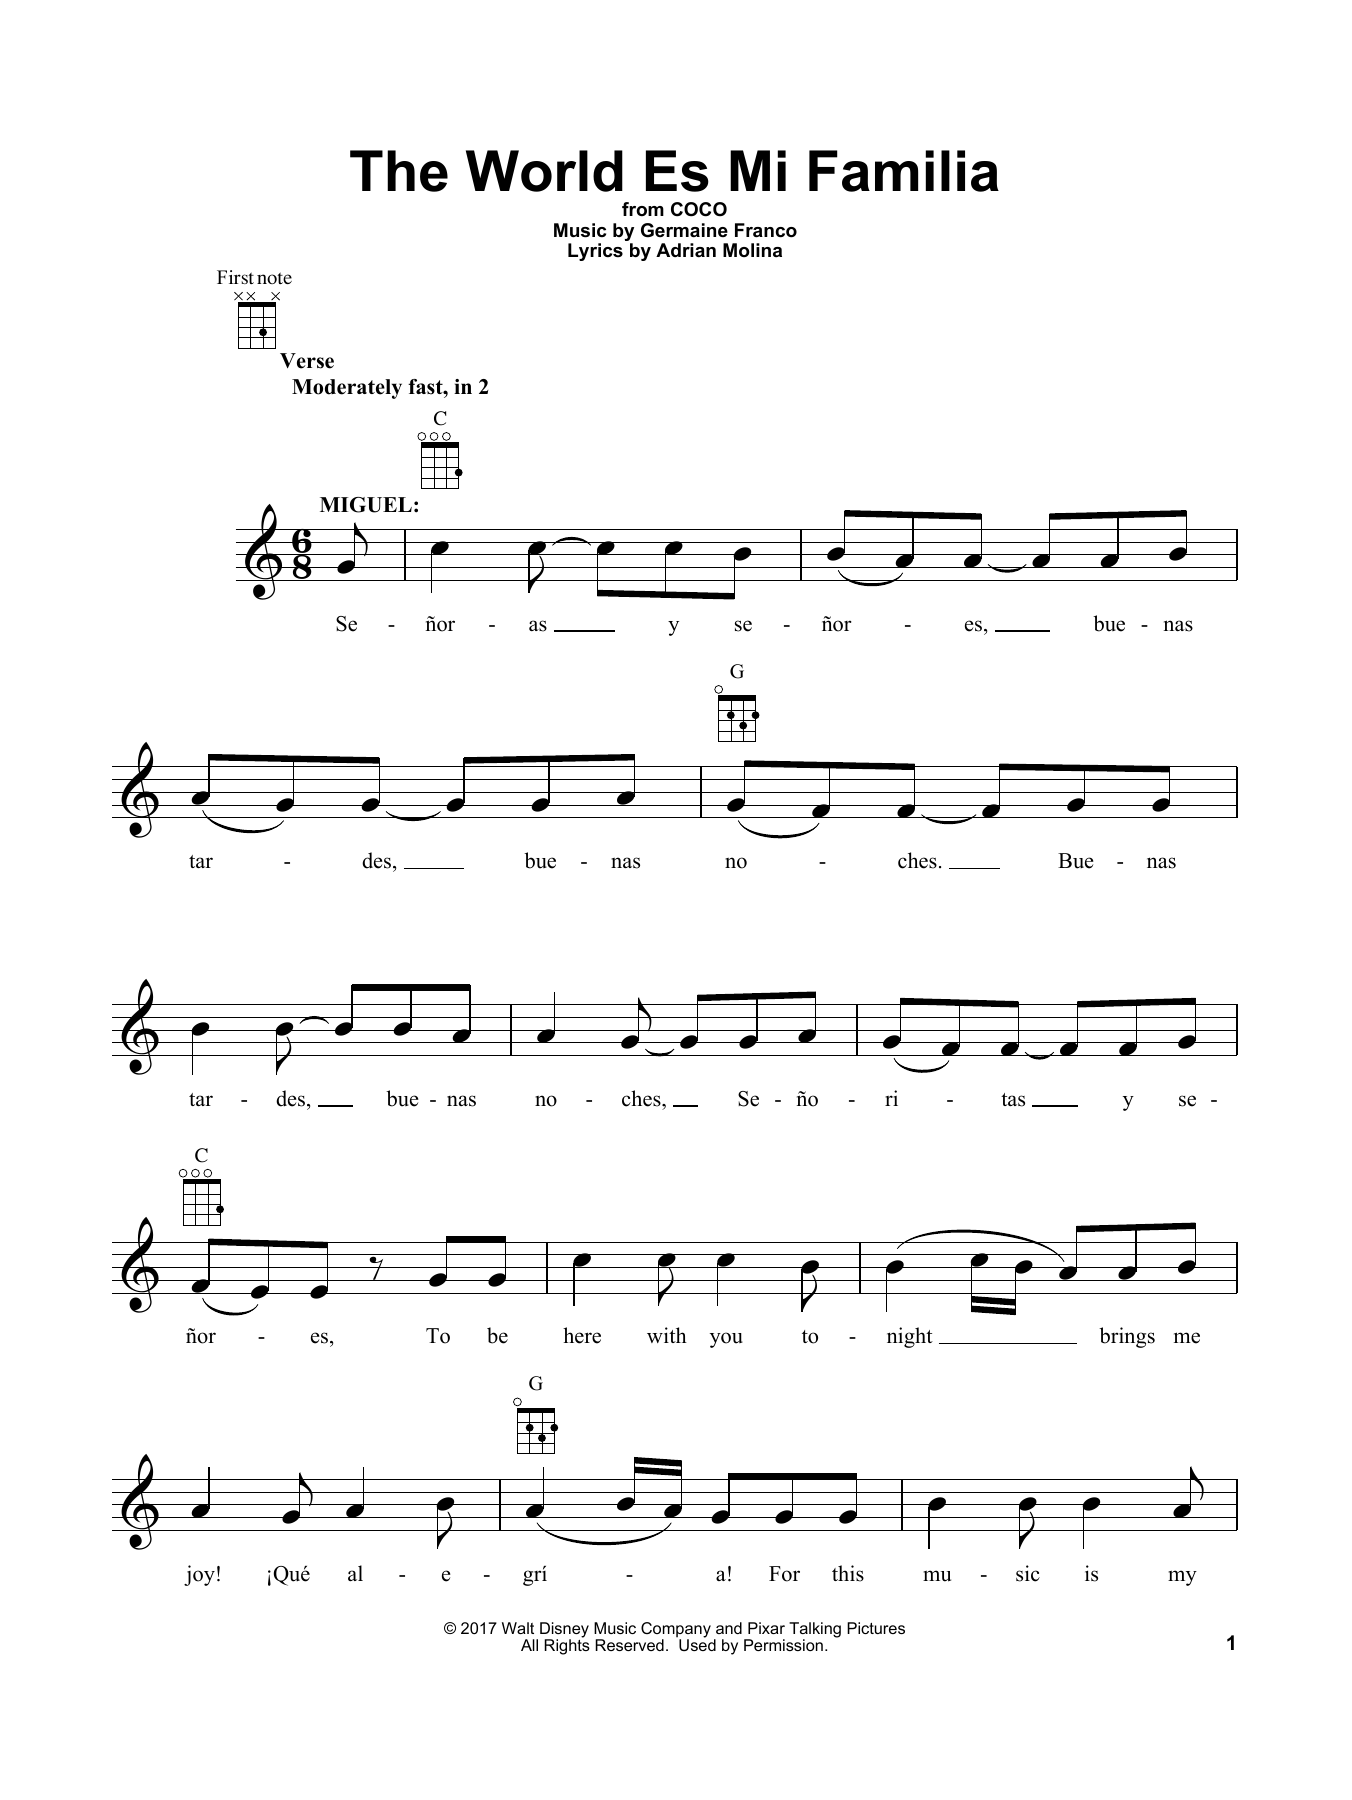 Download Germaine Franco & Adrian Molina The World Es Mi Familia (from Coco) Sheet Music